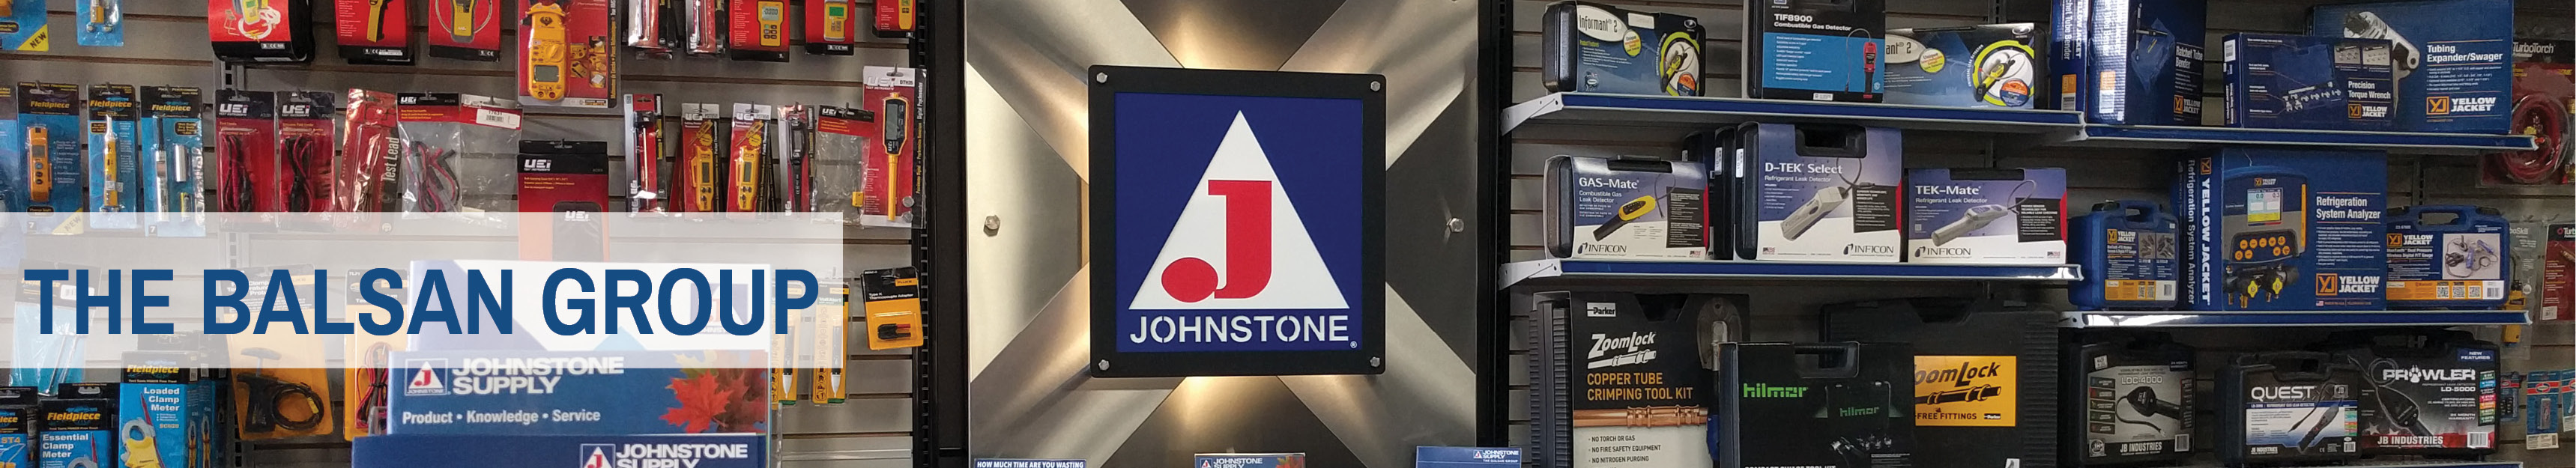 HVAC/R Knowledge - About Johnstone Supply, The Balsan Group